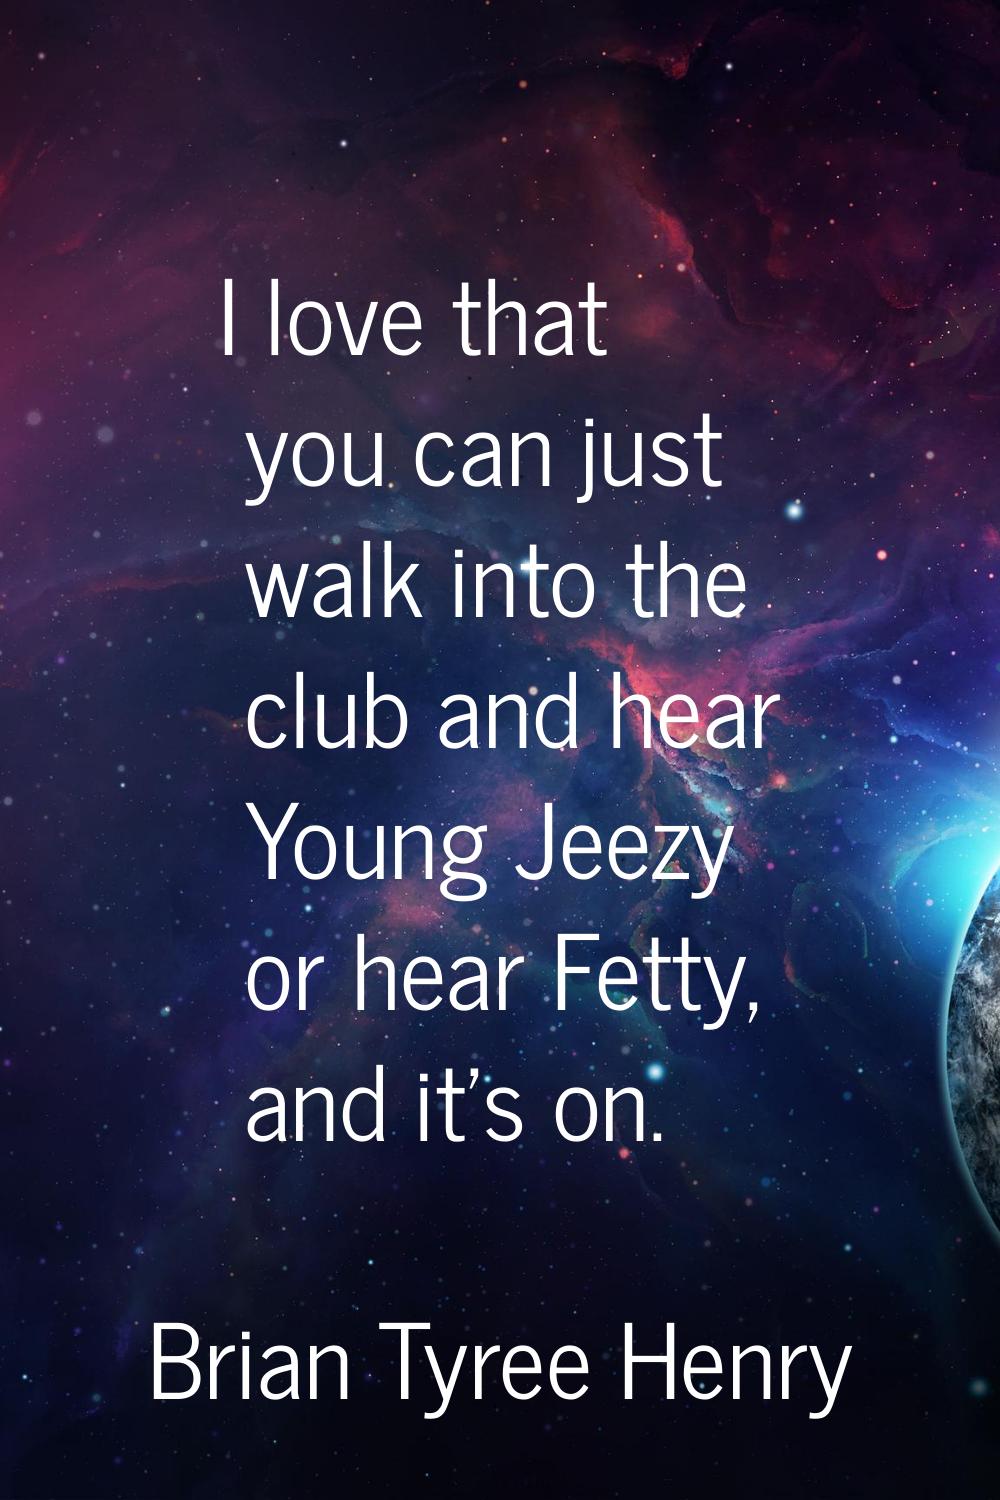 I love that you can just walk into the club and hear Young Jeezy or hear Fetty, and it's on.